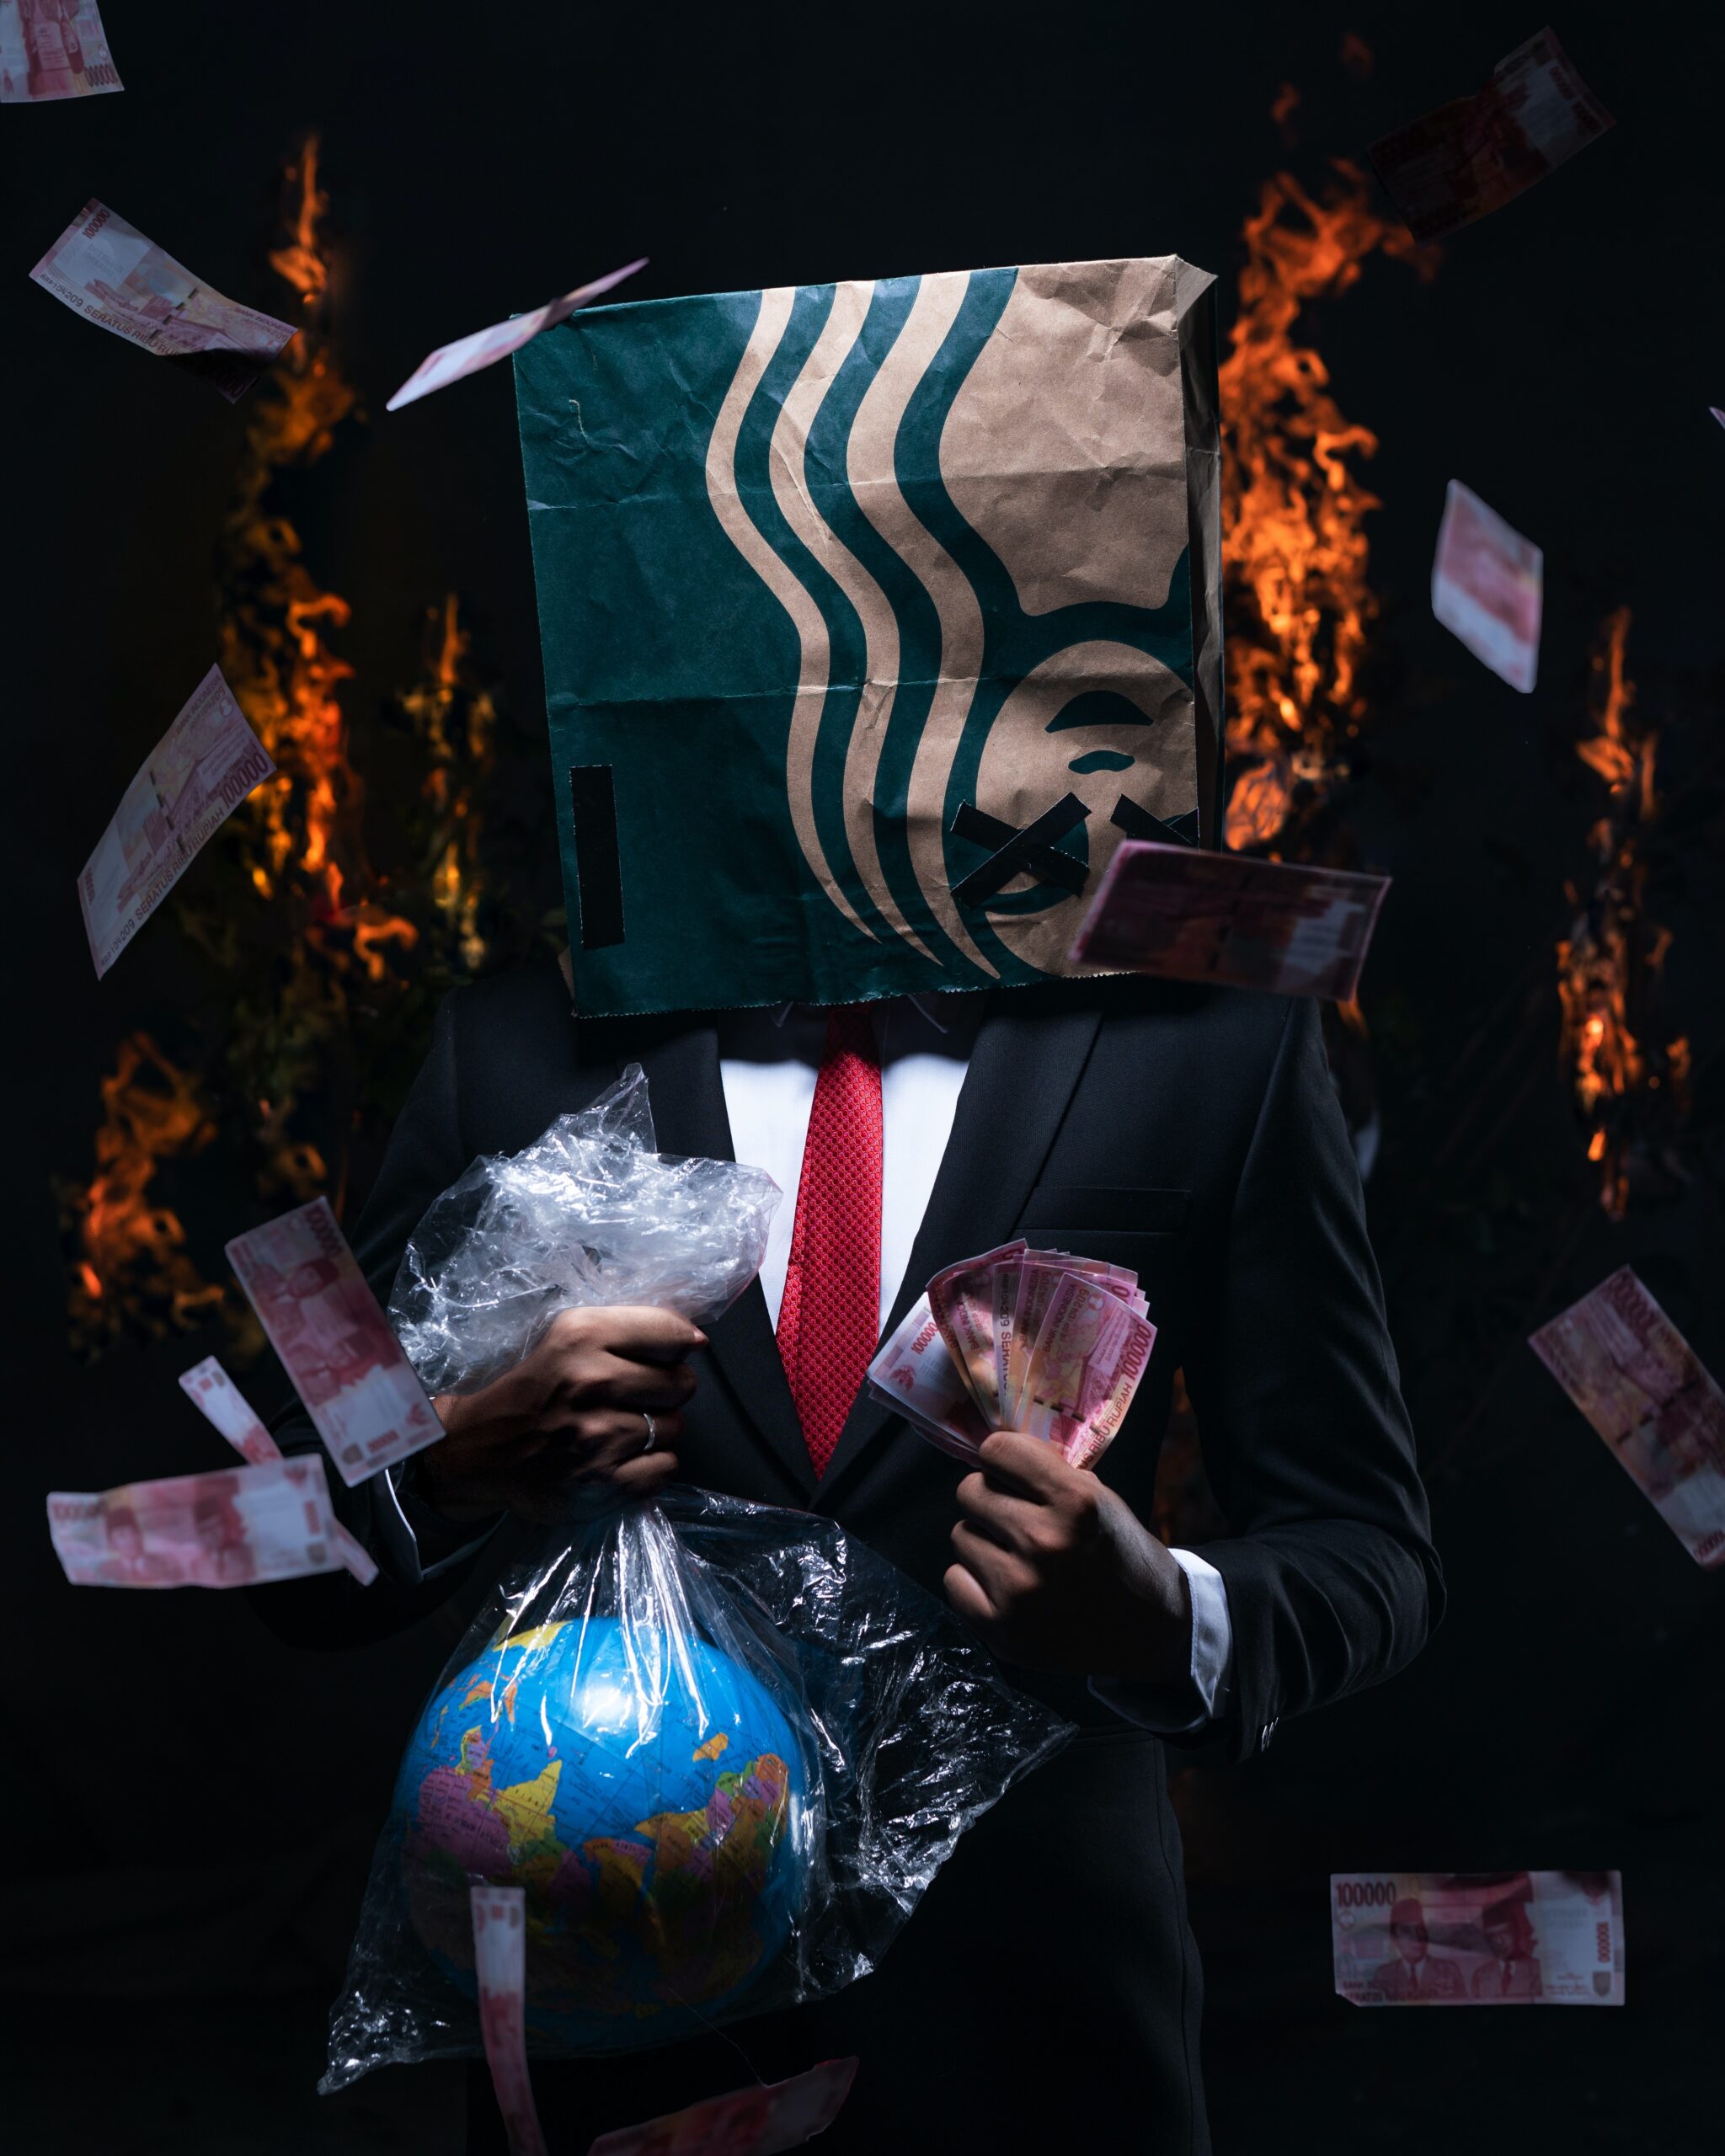 person holding a globe in a plastic bag in one hand, wads of money in the other, and a Starbucks bag on head, while the background is in flames